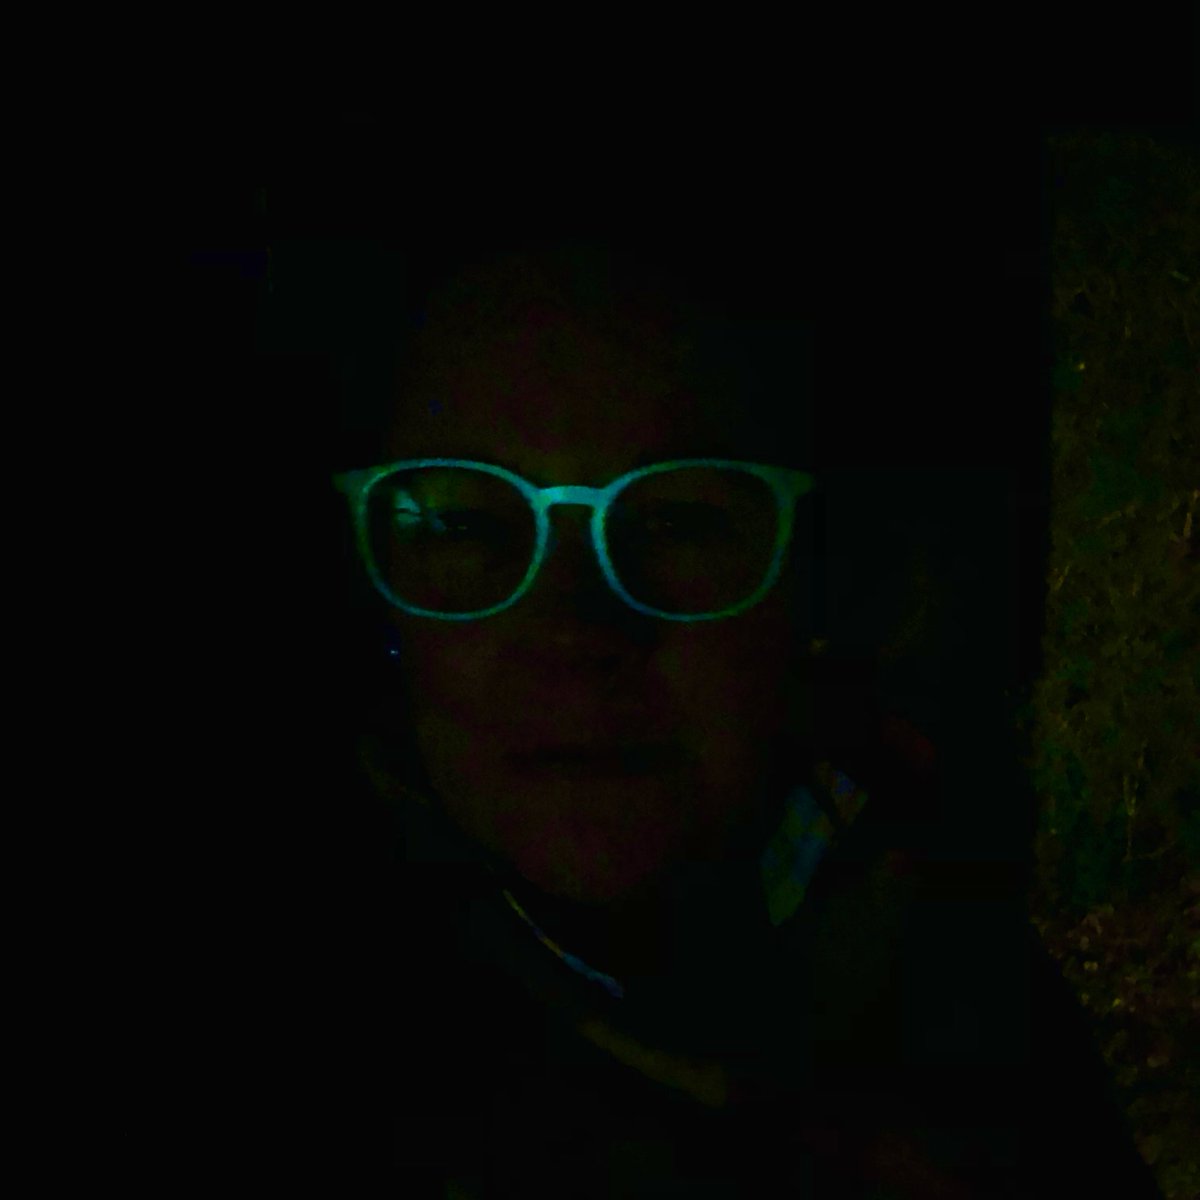 My new glasses actually glow in the dark!! Absolutely totally wasn’t expecting that!🤪 Hope you’ve had an exciting Monday too xx ❤️🧡💛💚💙💜